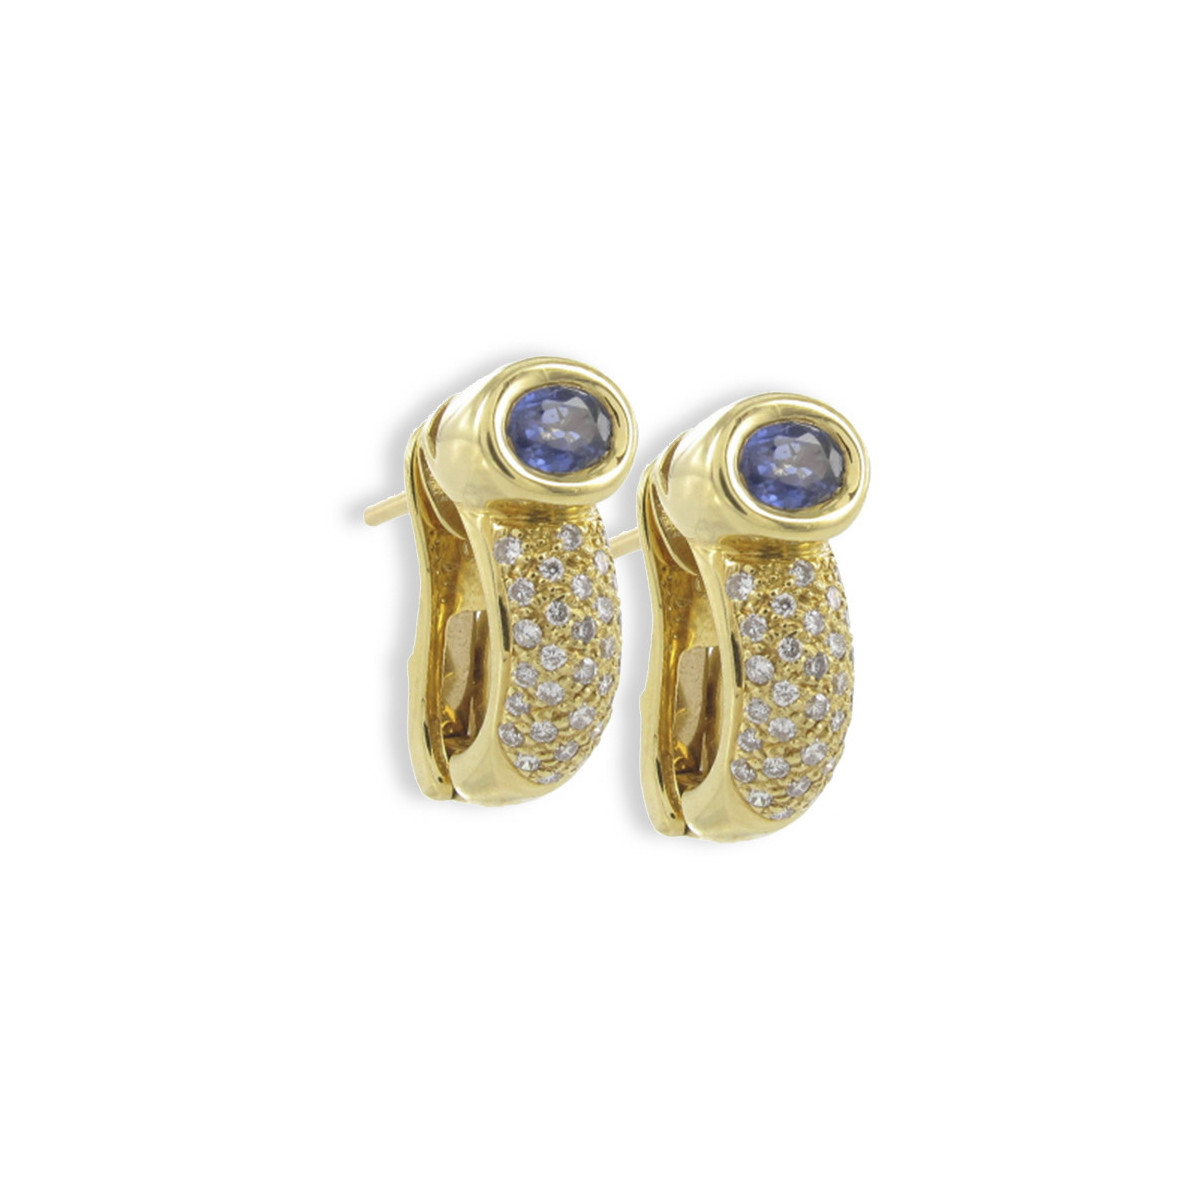 GOLD SAPPHIRE AND DIAMONDS EARRINGS